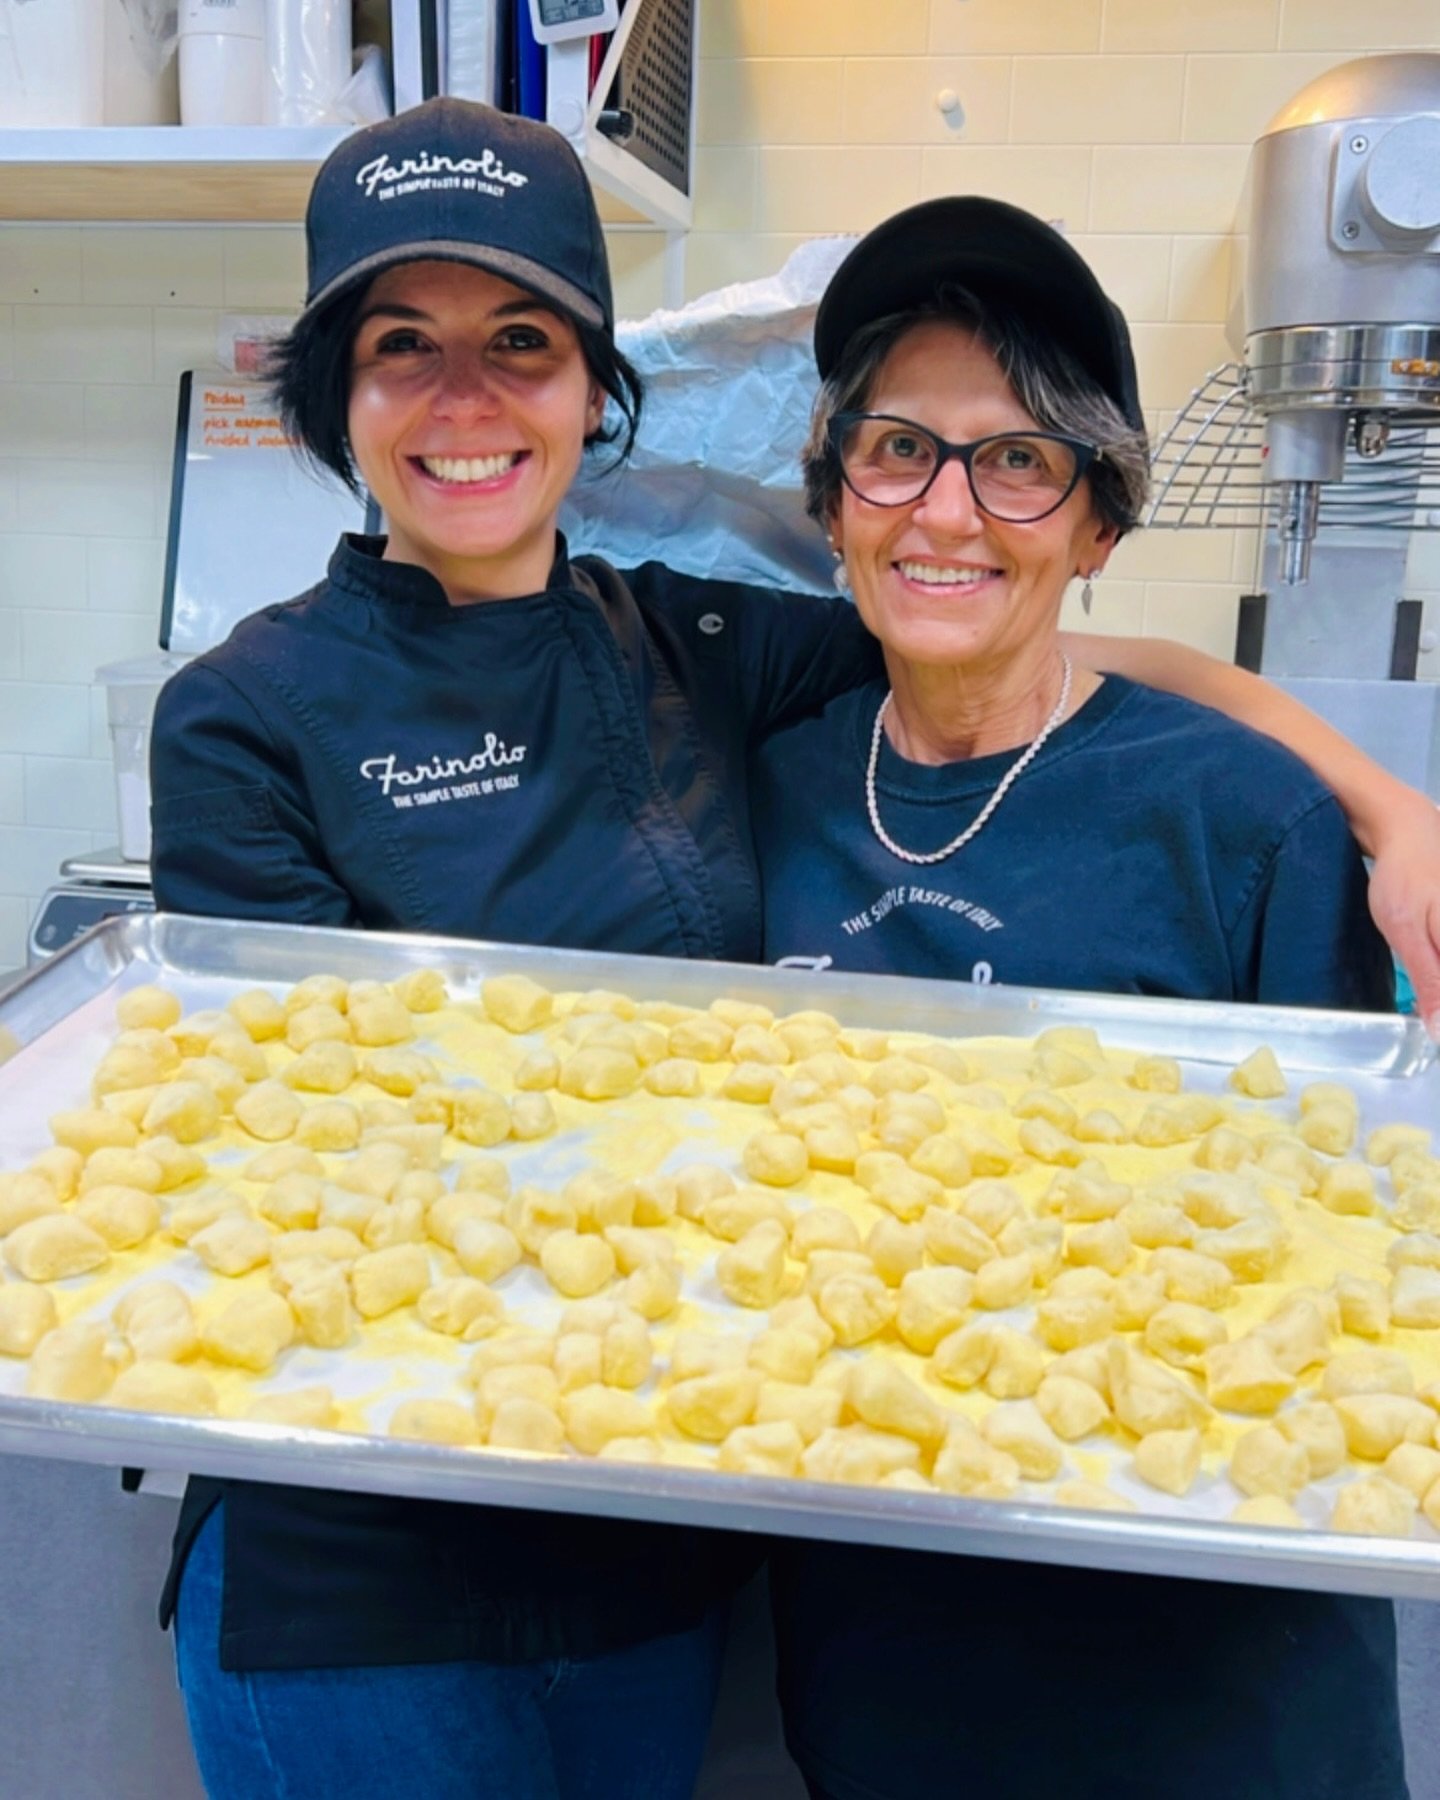 Mamma Monica and Chef Laura were thrilled to share their cherished ricetta di famiglia: gnocchi di patate! 

We hope you savored every bite of our delightful Gnocchi alla Sorrentina trays. 

Stay tuned for more exciting culinary offers, exclusively a